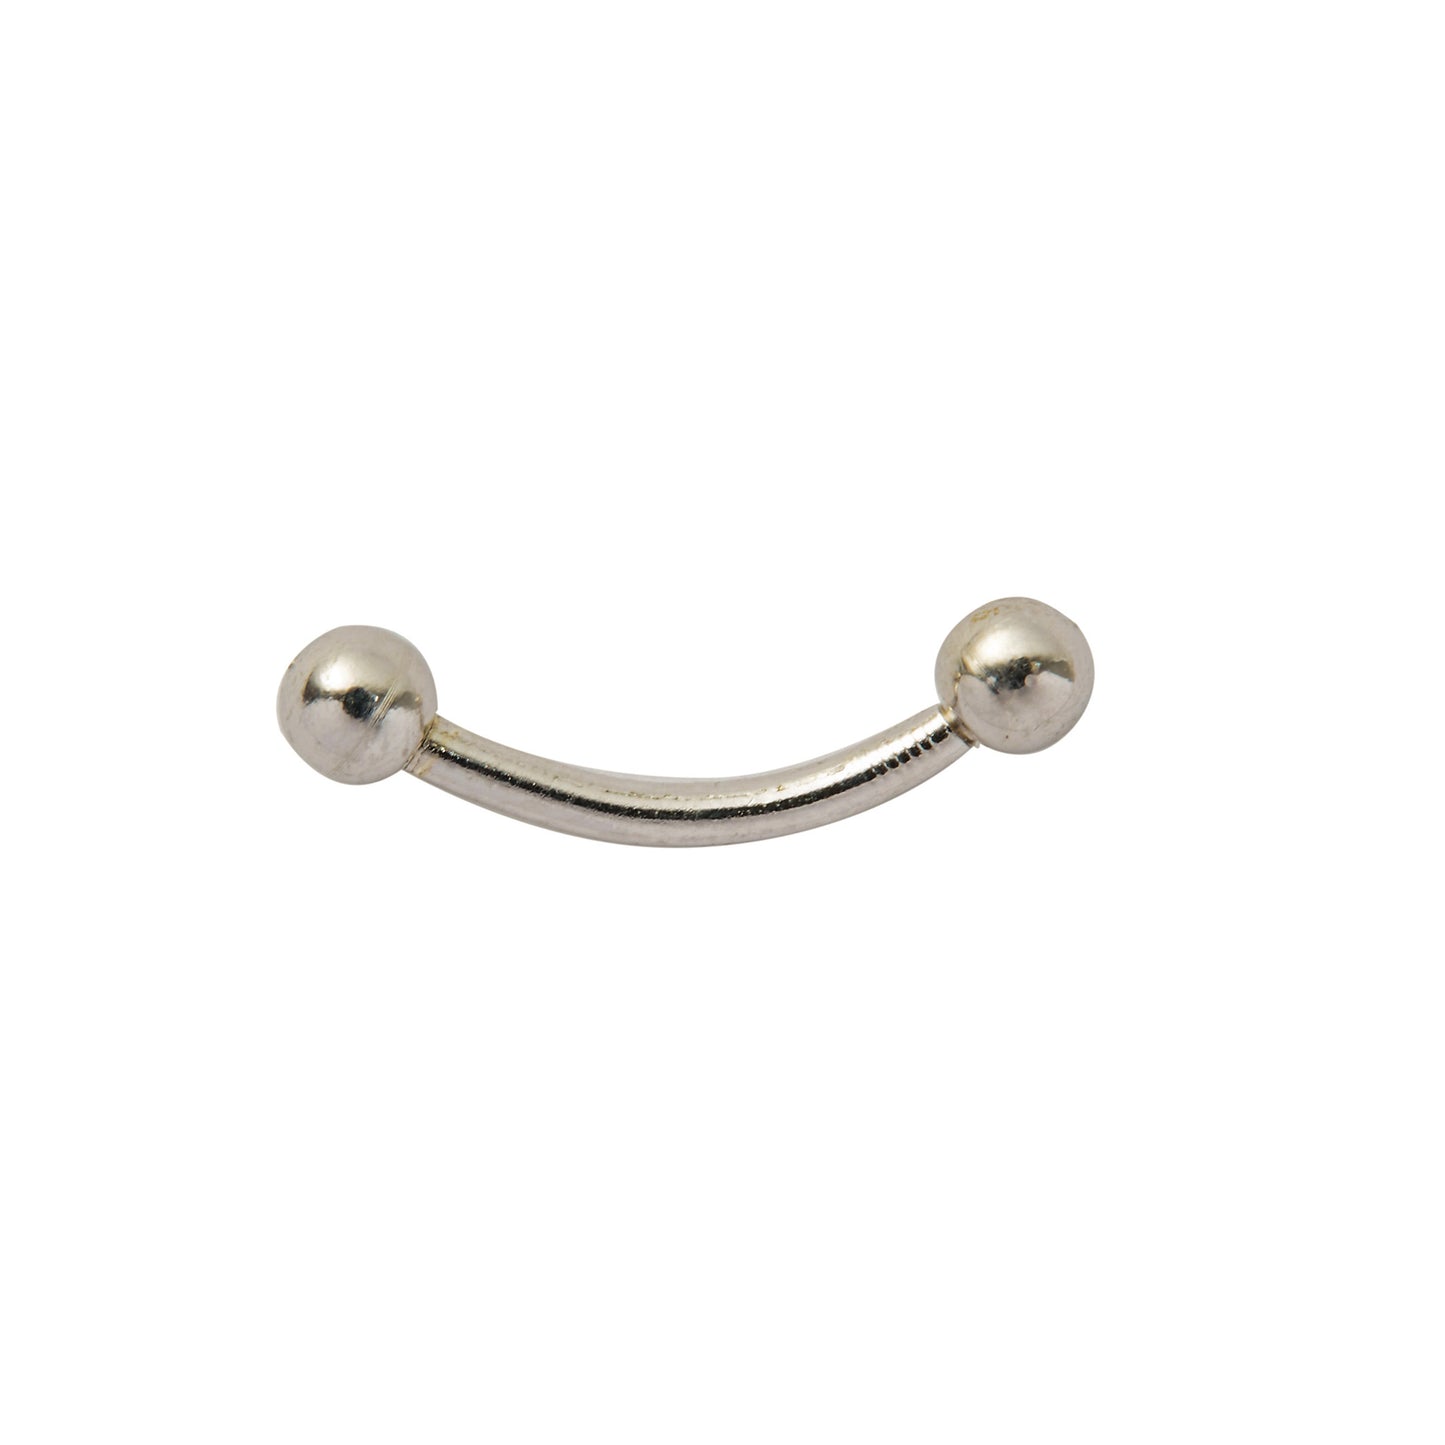 Solid 925 Silver | 16G Small Curved Barbell | 6mm 1/4" 8mm 5/16" 10mm 3/8" | Eyebrow | Septum | Daith | Rook - Sturdy South